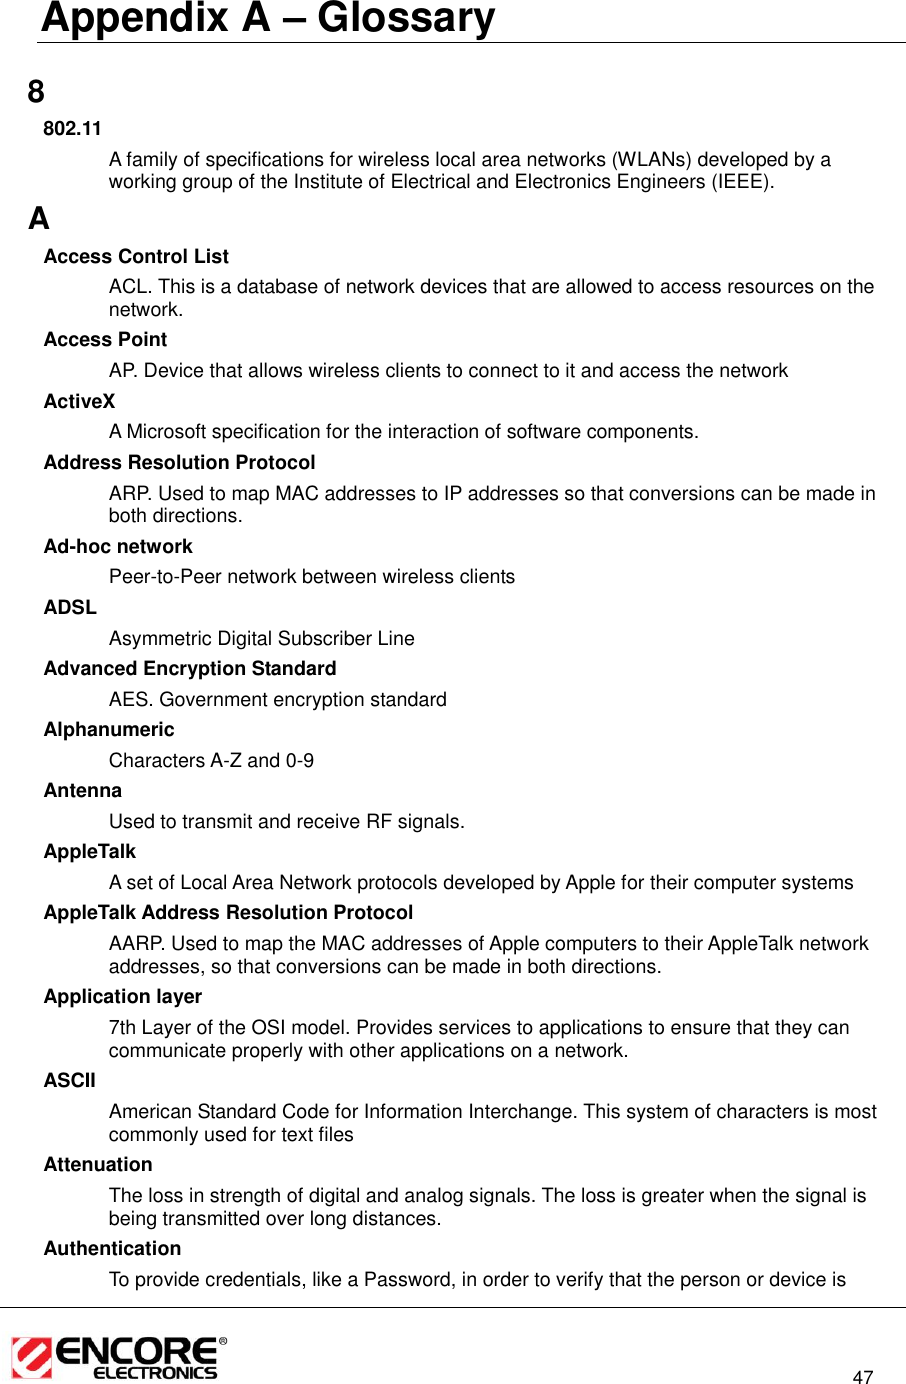                                                                                                                          47  Appendix A – Glossary   8 802.11 A family of specifications for wireless local area networks (WLANs) developed by a working group of the Institute of Electrical and Electronics Engineers (IEEE).  A Access Control List ACL. This is a database of network devices that are allowed to access resources on the network. Access Point AP. Device that allows wireless clients to connect to it and access the network ActiveX A Microsoft specification for the interaction of software components.  Address Resolution Protocol ARP. Used to map MAC addresses to IP addresses so that conversions can be made in both directions. Ad-hoc network Peer-to-Peer network between wireless clients ADSL Asymmetric Digital Subscriber Line Advanced Encryption Standard AES. Government encryption standard Alphanumeric Characters A-Z and 0-9 Antenna Used to transmit and receive RF signals. AppleTalk A set of Local Area Network protocols developed by Apple for their computer systems AppleTalk Address Resolution Protocol AARP. Used to map the MAC addresses of Apple computers to their AppleTalk network addresses, so that conversions can be made in both directions. Application layer 7th Layer of the OSI model. Provides services to applications to ensure that they can communicate properly with other applications on a network. ASCII American Standard Code for Information Interchange. This system of characters is most commonly used for text files Attenuation The loss in strength of digital and analog signals. The loss is greater when the signal is being transmitted over long distances. Authentication To provide credentials, like a Password, in order to verify that the person or device is 